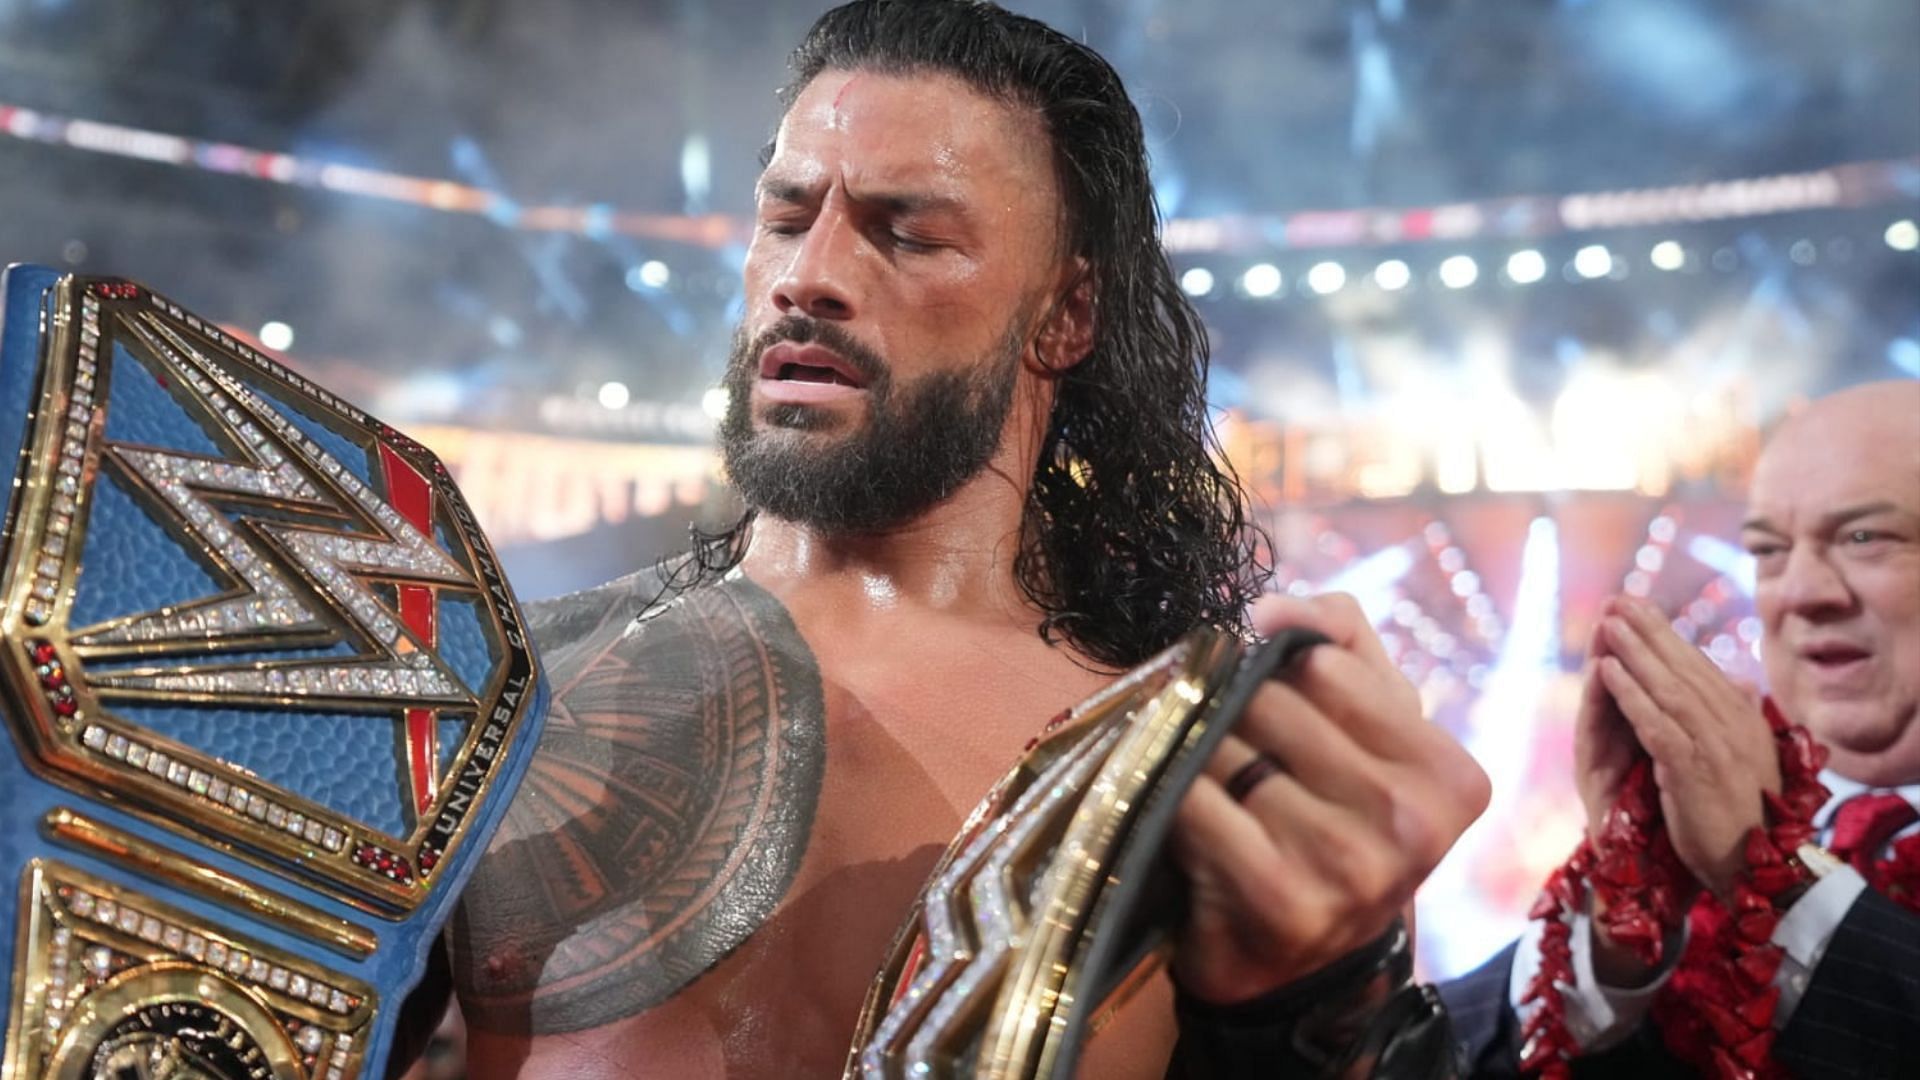 Roman Reigns closed out WrestleMania 39 still the Undisputed WWE Universal Champion.